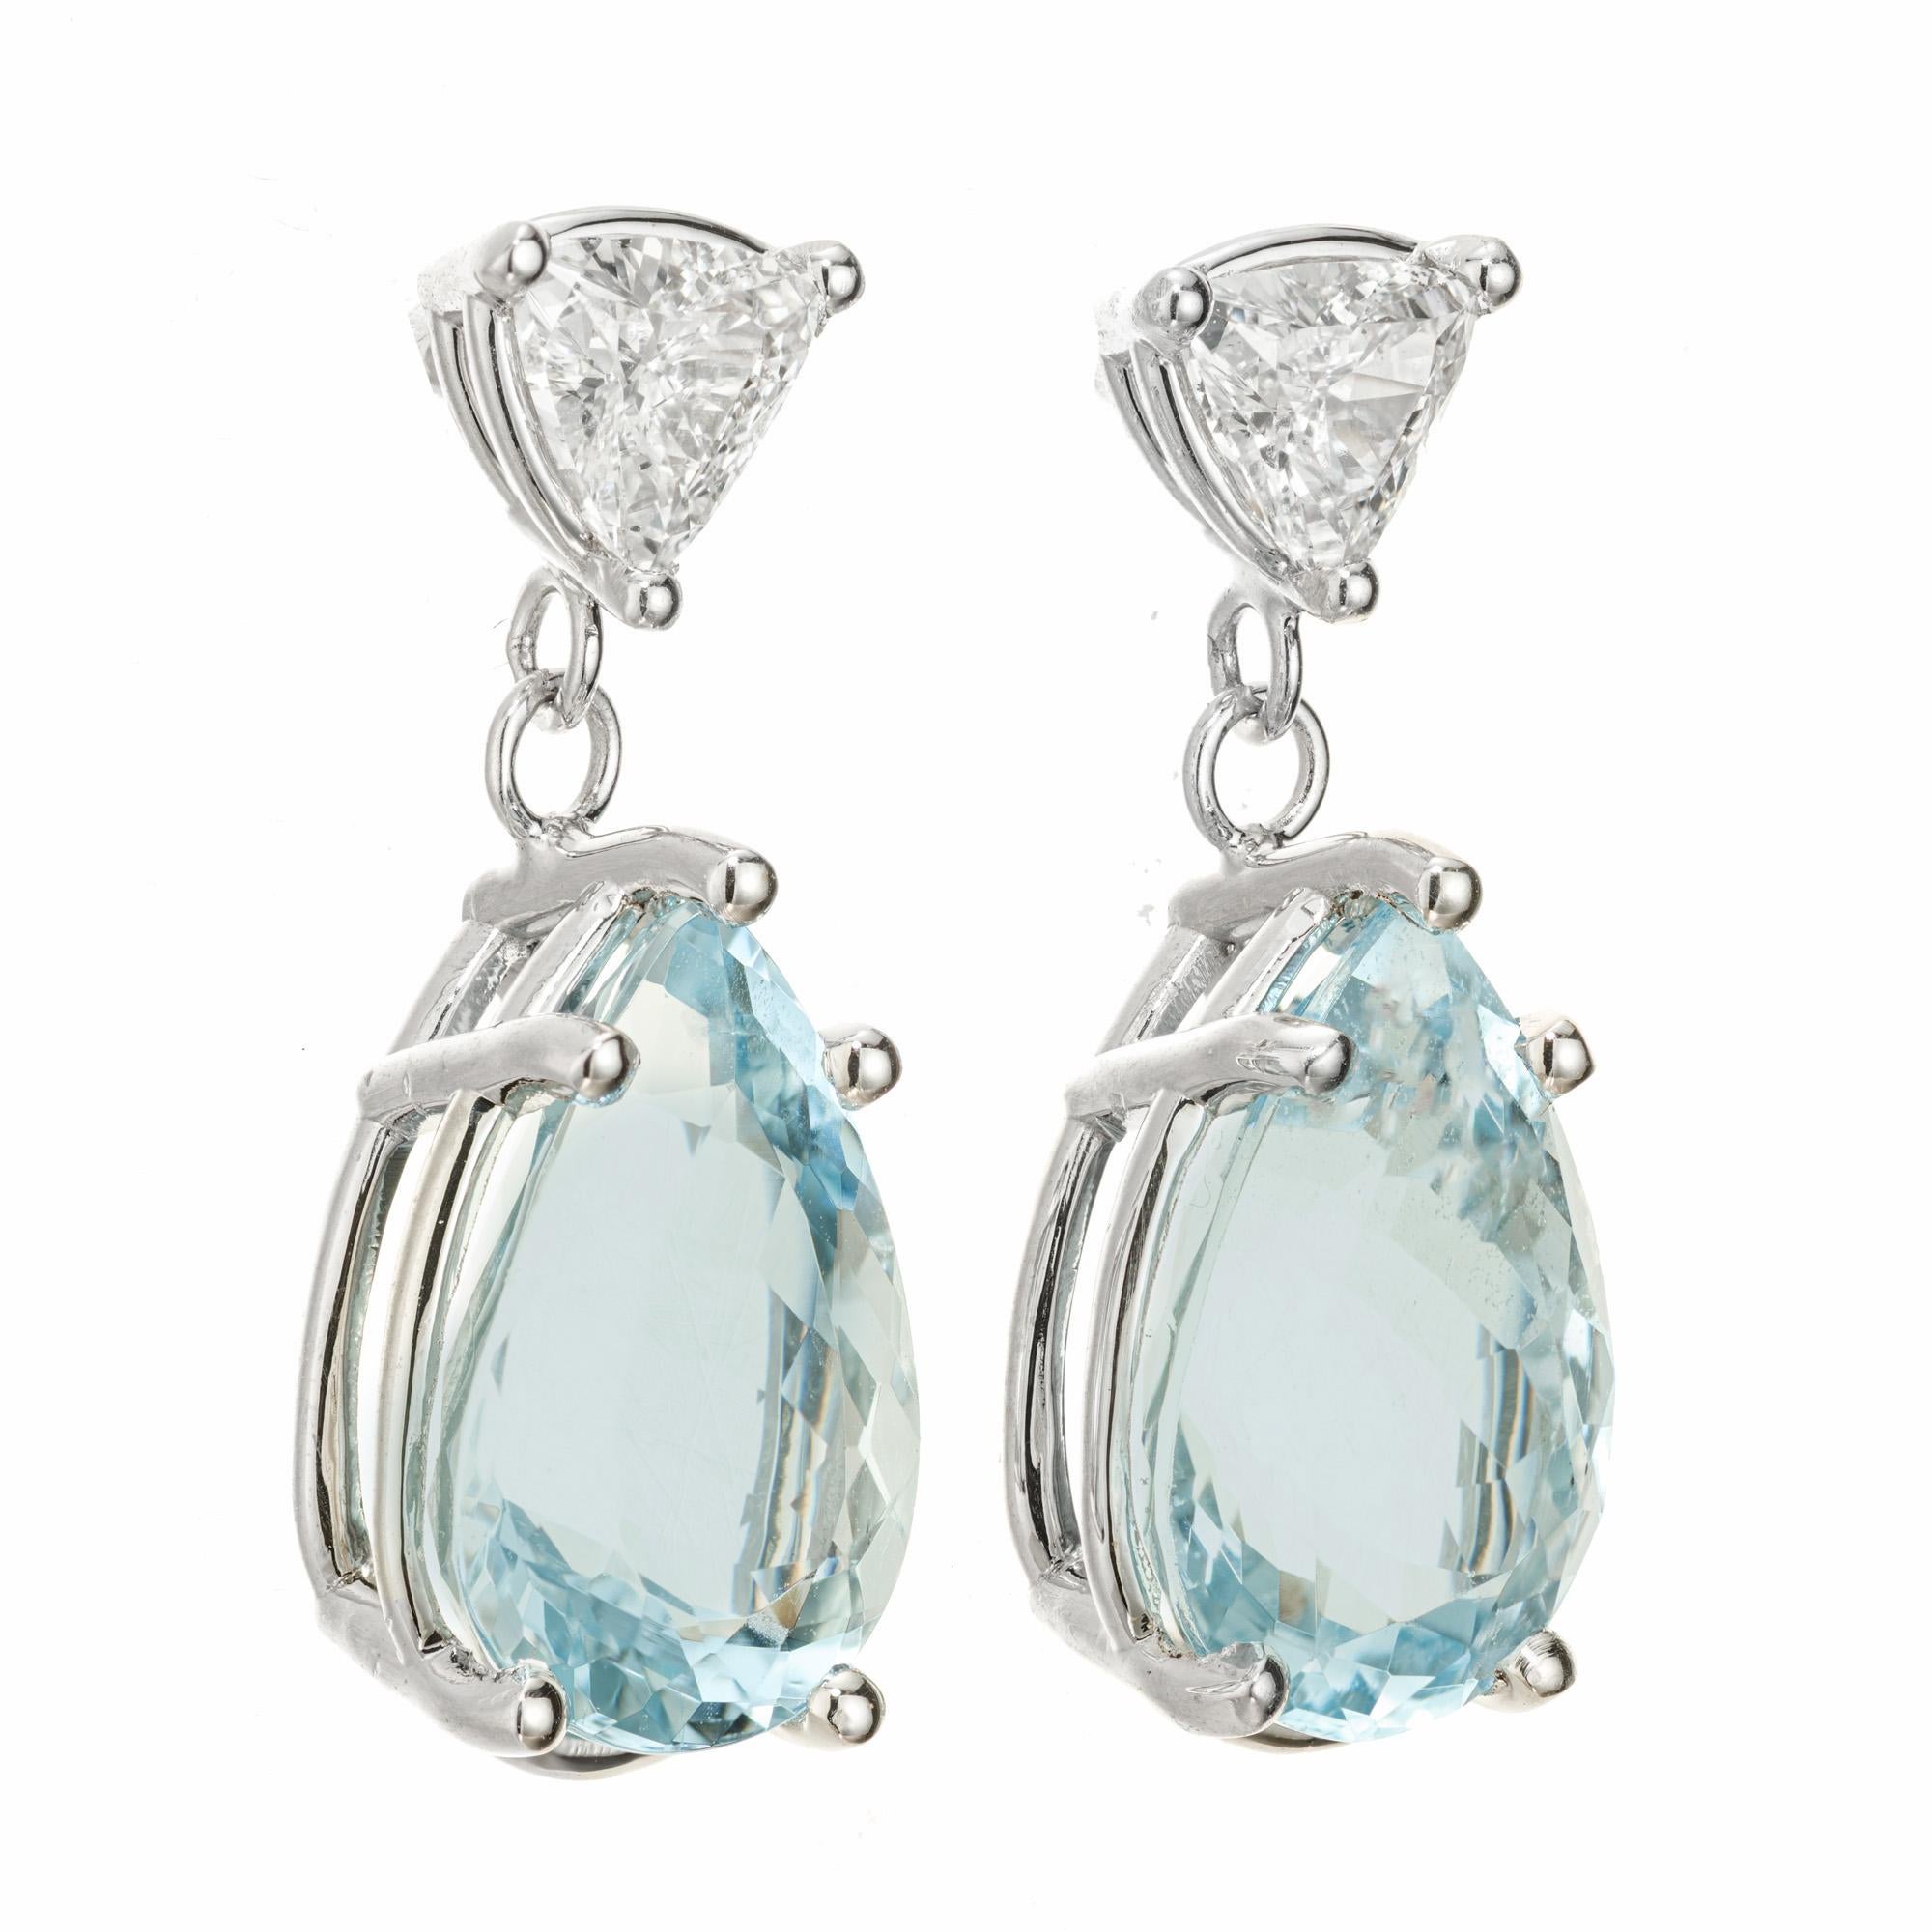 Art Deco inspired. Aqua and diamond earrings. 2 trilliant cut diamonds, each with a pear shaped bright aquamarine dangle. Both totaling 5.80 carats in 14k white gold settings. Designed and crafted in the Peter Suchy Workshop. 

2 pear shape blue